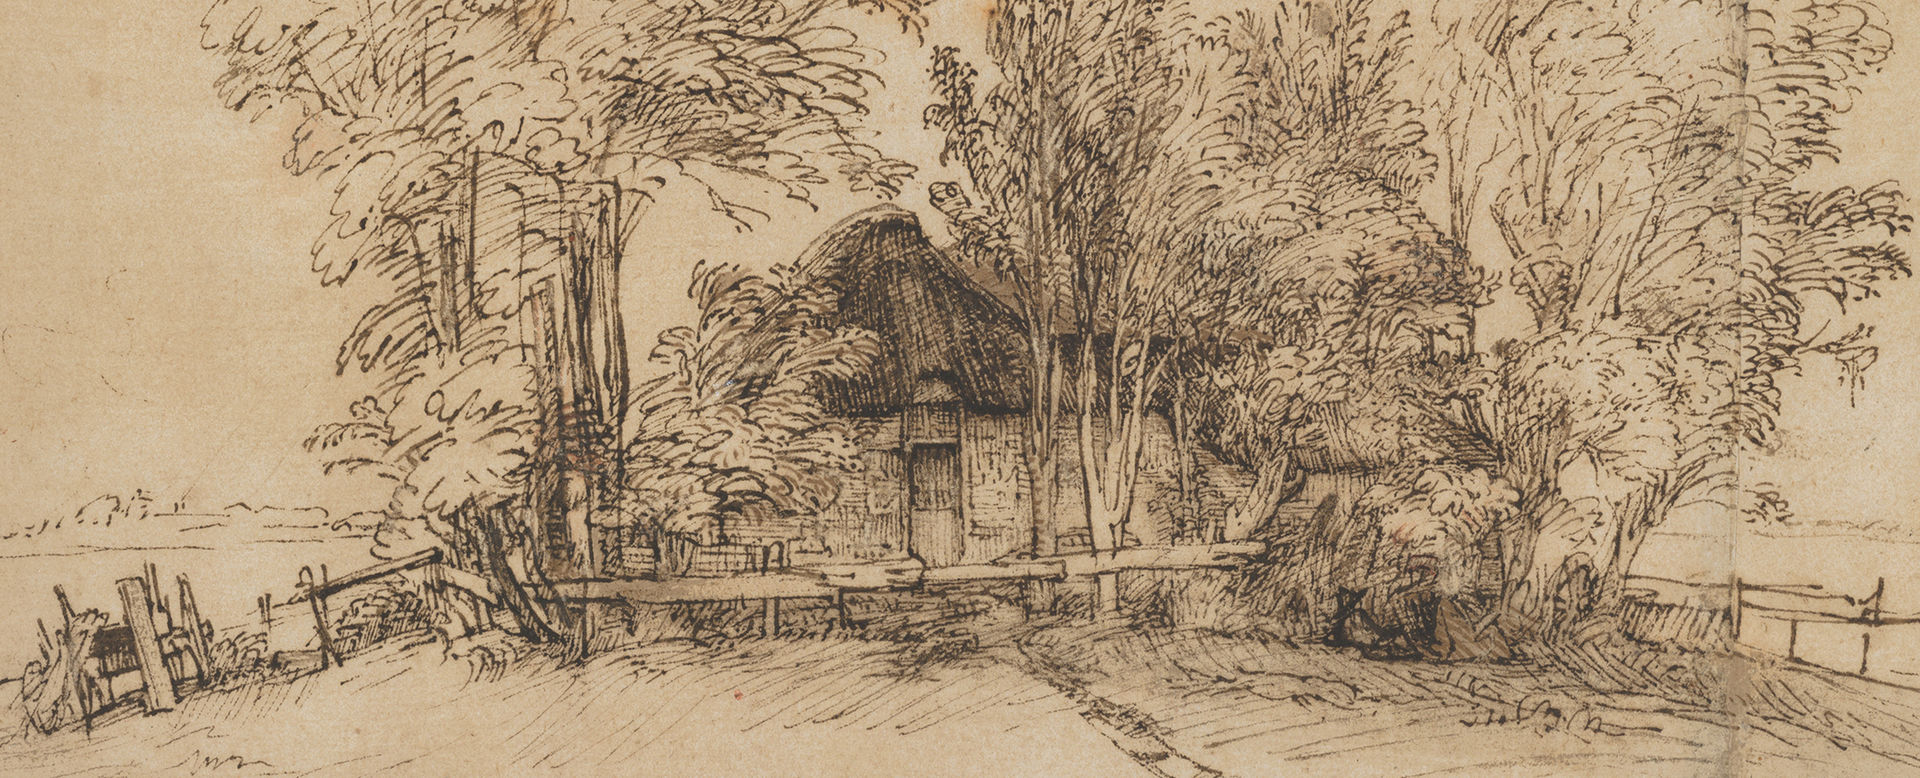 A frenetic, detailed line drawing of a thatched-roof cottage surrounded by trees and farmland.